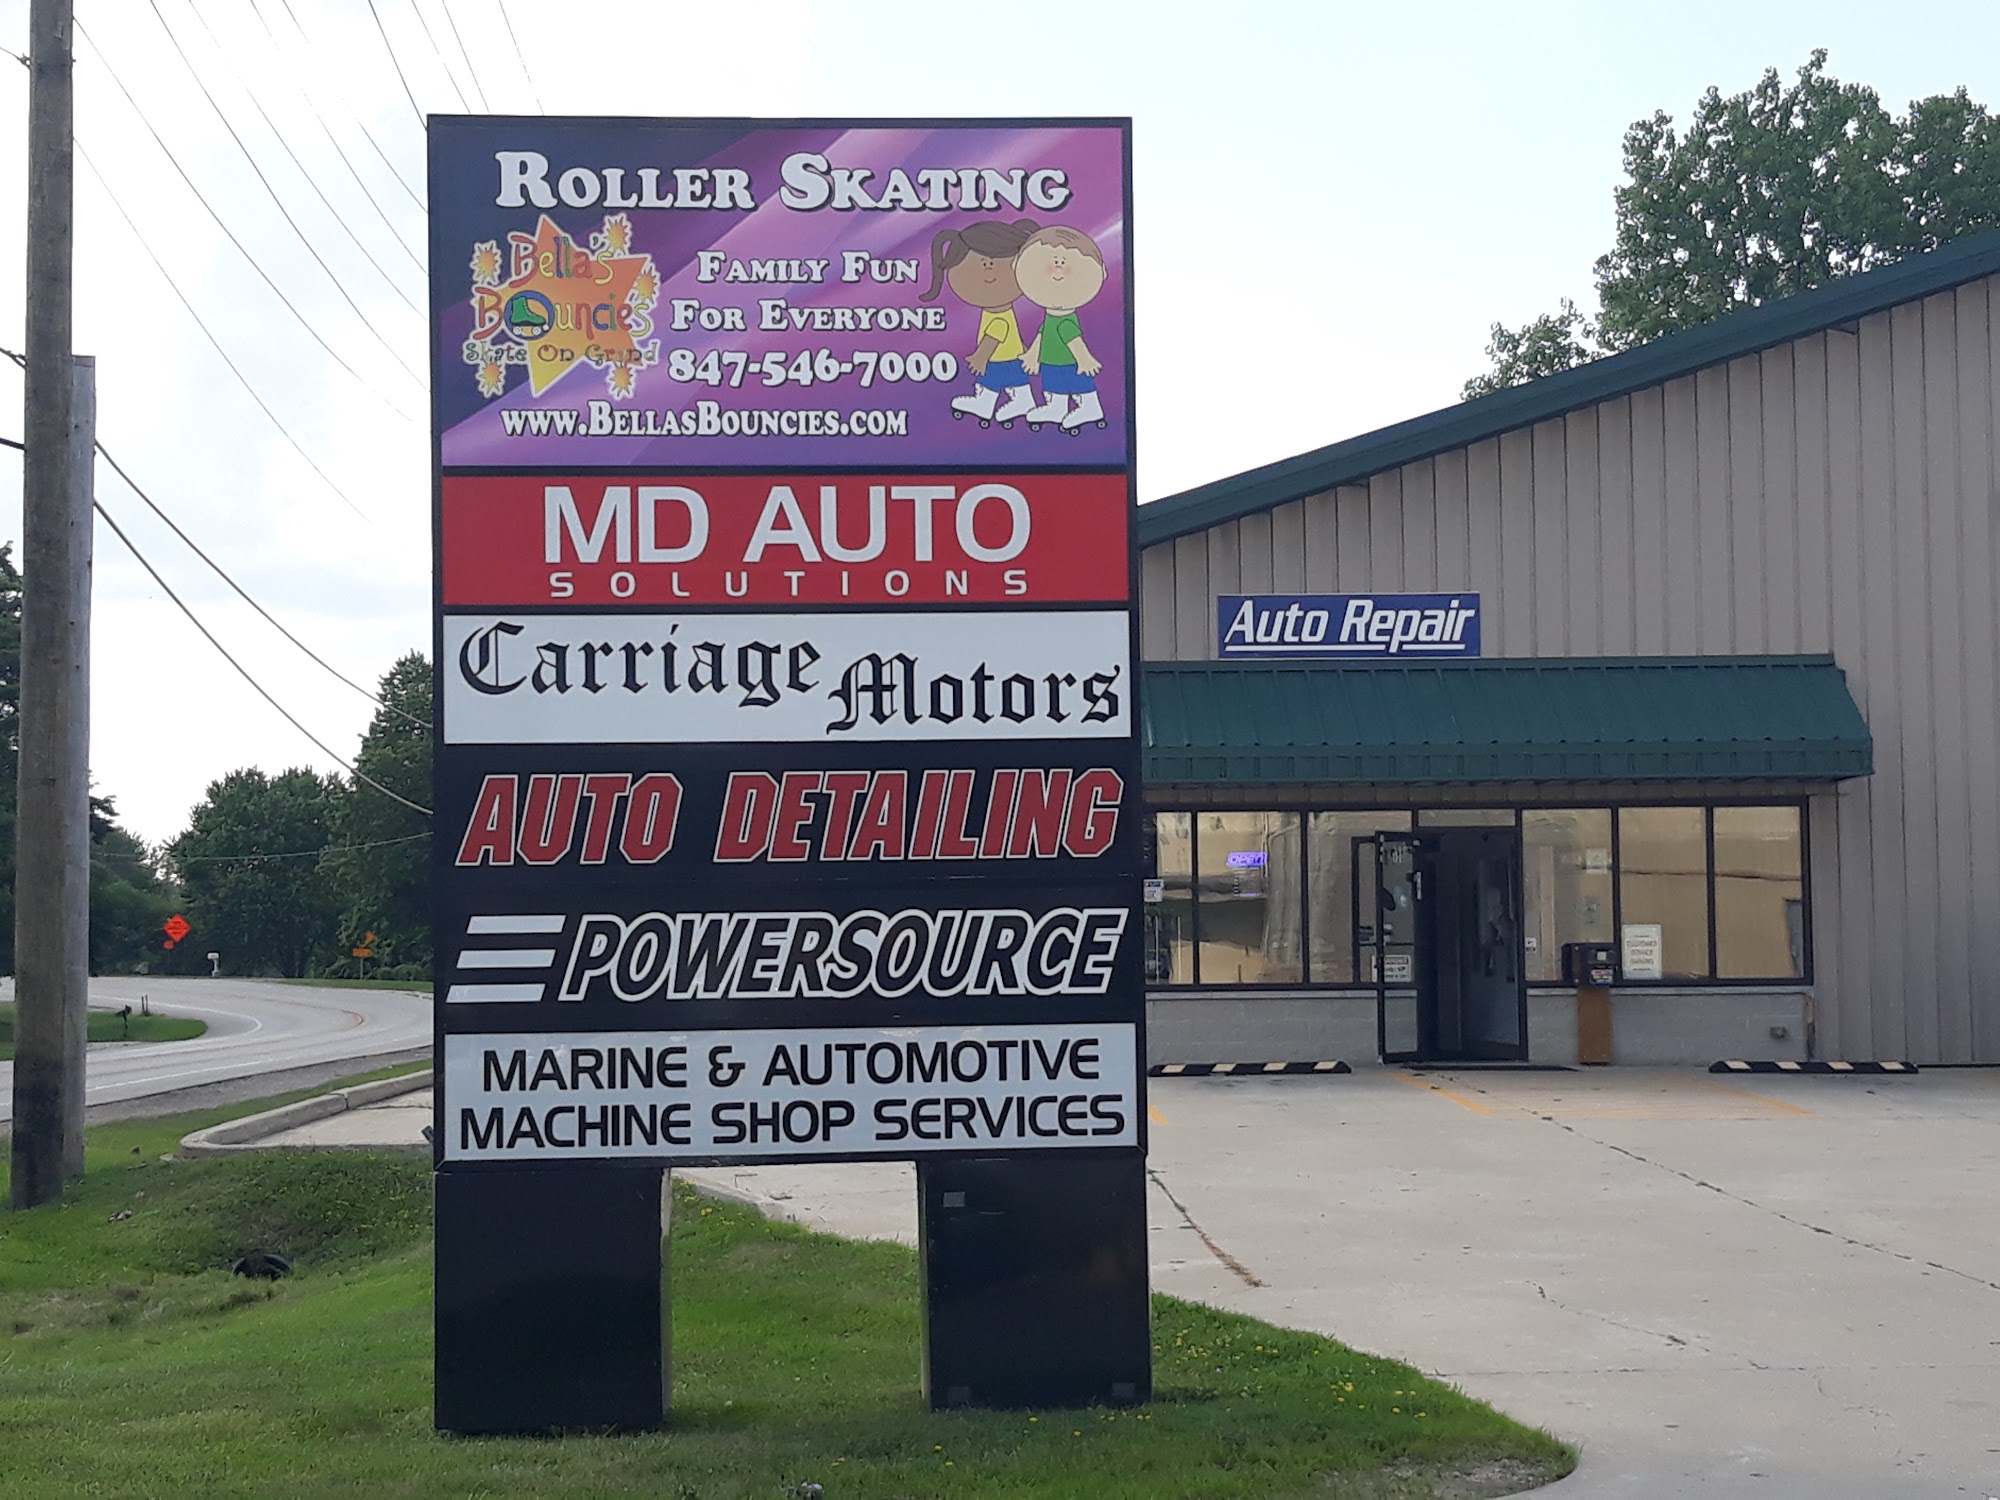 MD AUTO SOLUTIONS